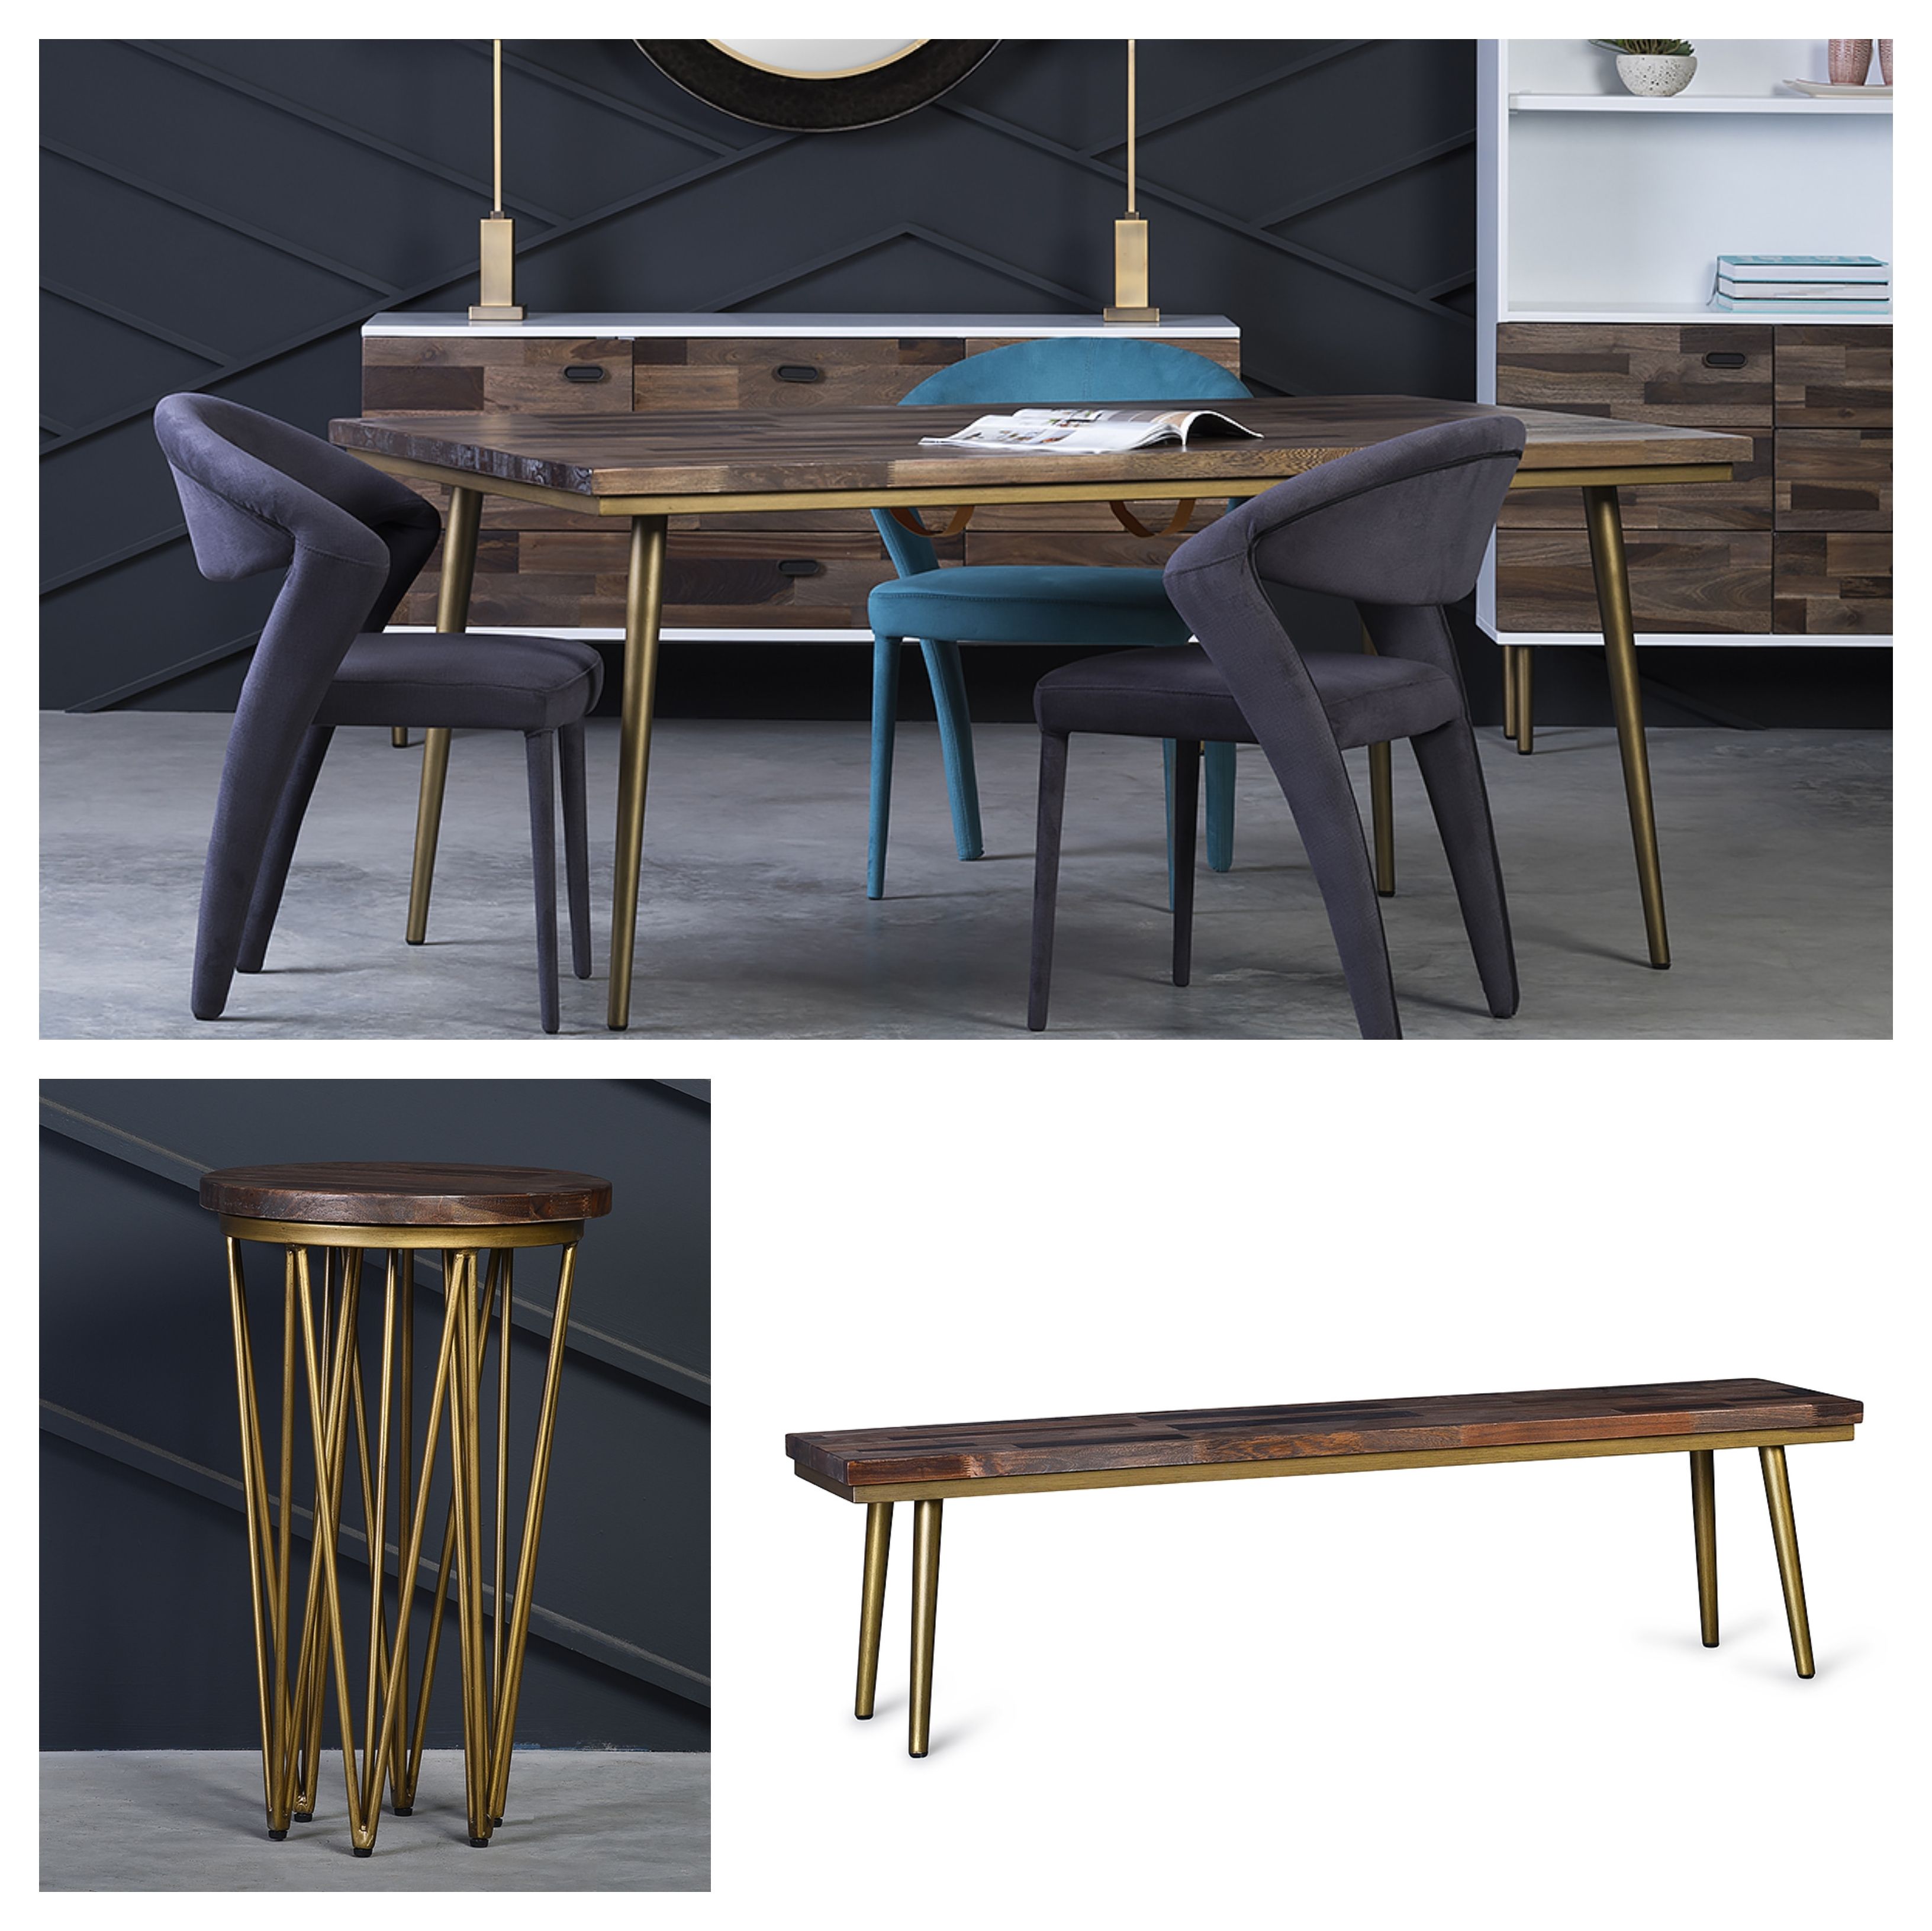 A Taste Of Dining – Furniture Stores Ireland For Recent Grady Round Dining Tables (View 15 of 20)